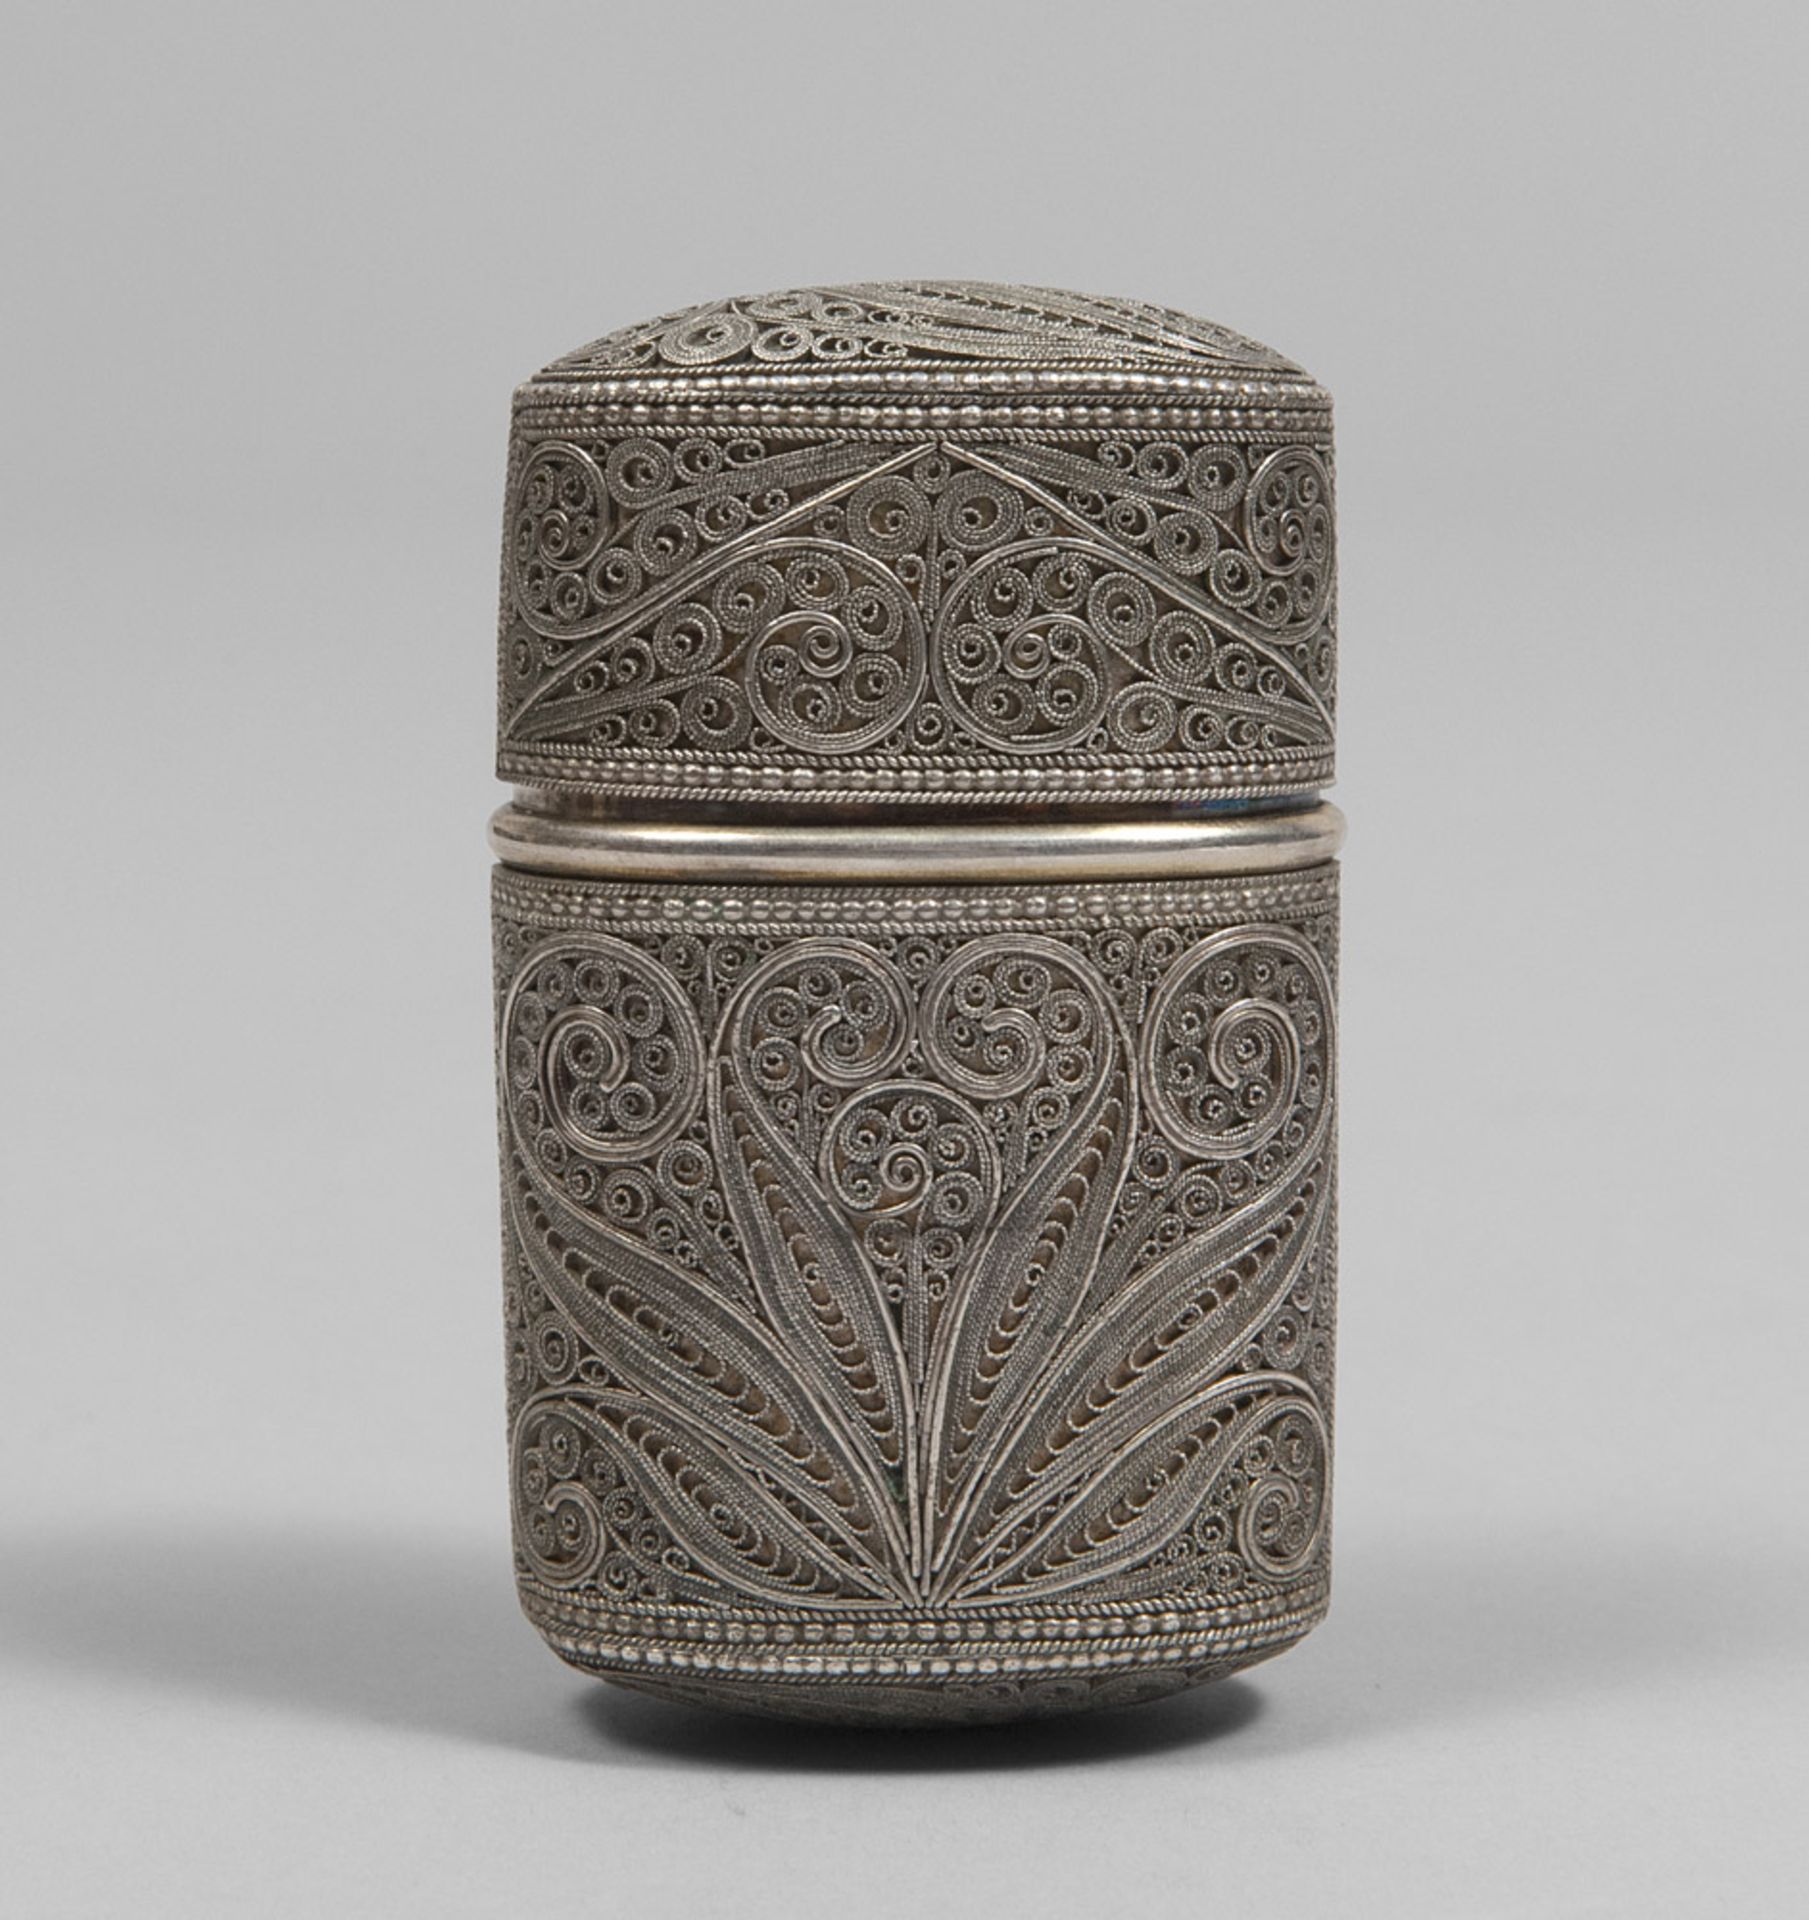 Casket in silver, probably Anatolia 19th century. Measures cm. 10 x 6,6 x 3,5, weight gr. 149.